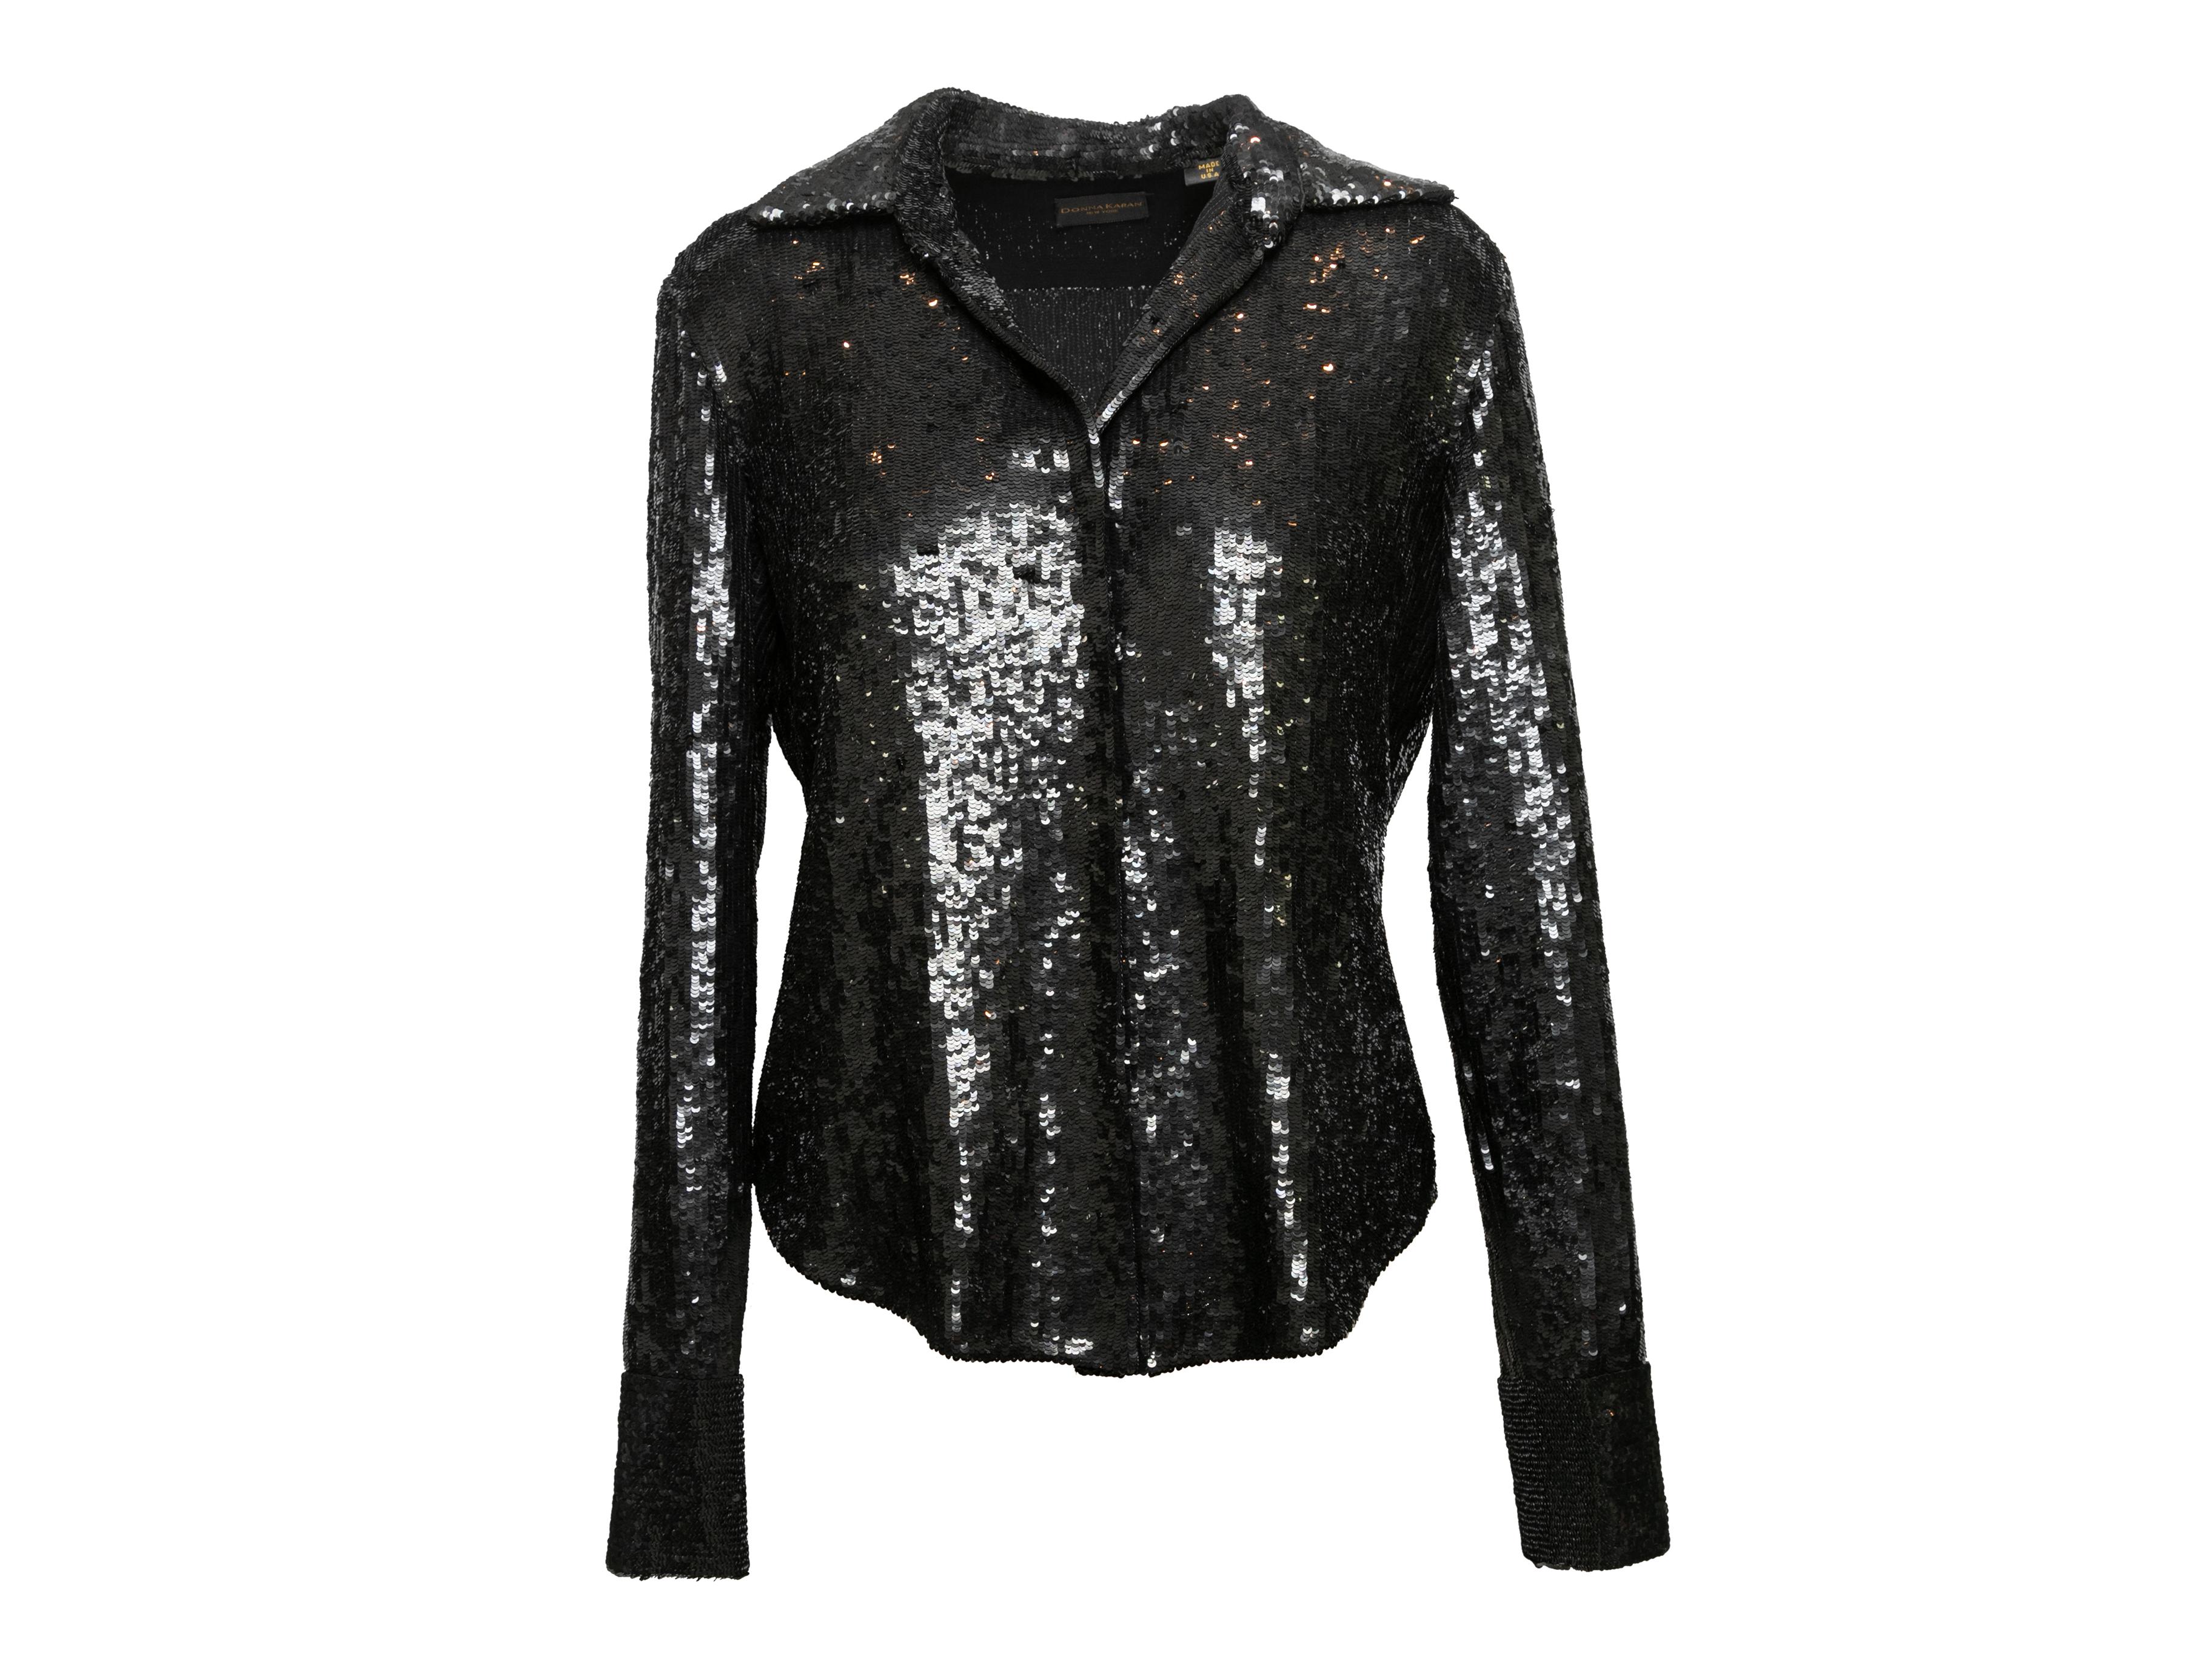 Black lightweight sequined jacket by Donna Karan. Pointed collar. Button closures at front. 34